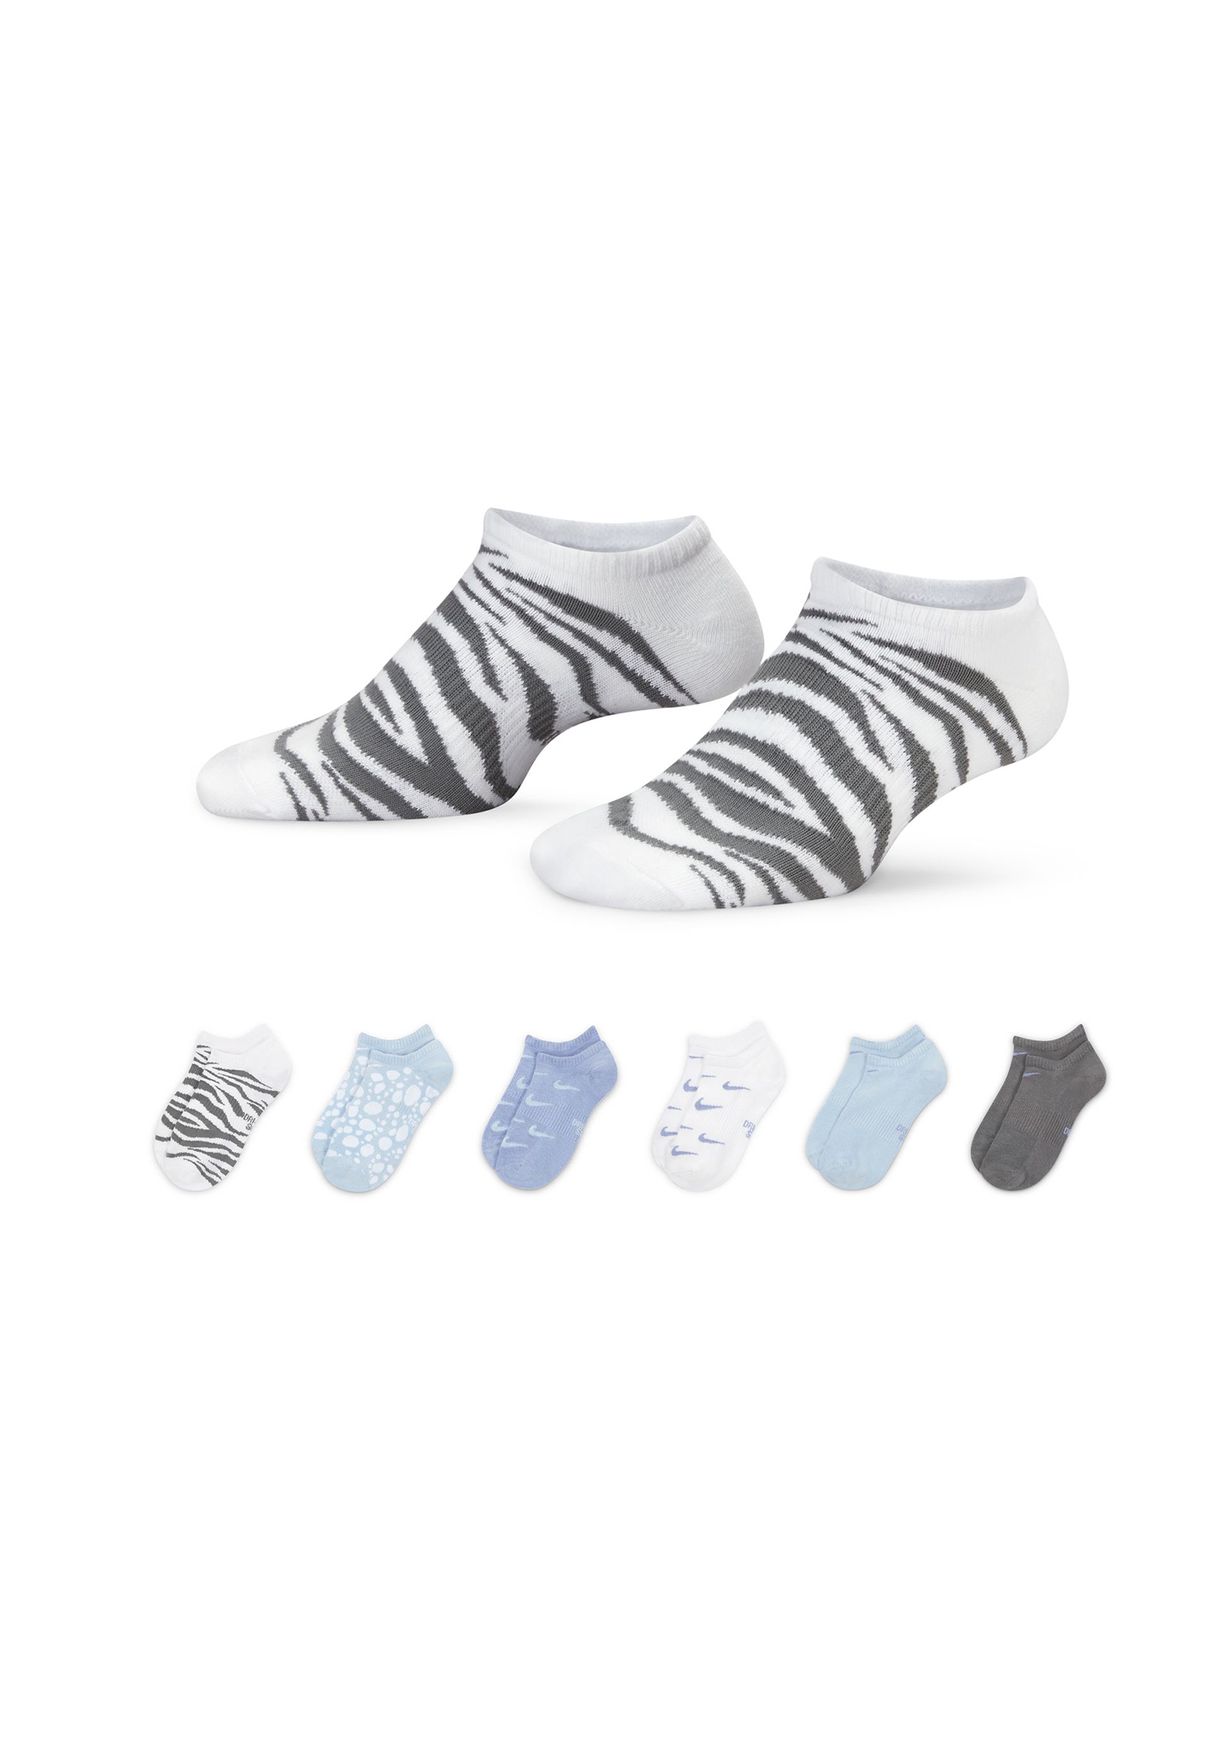 Youth 6 Pack Graphic No Show Socks